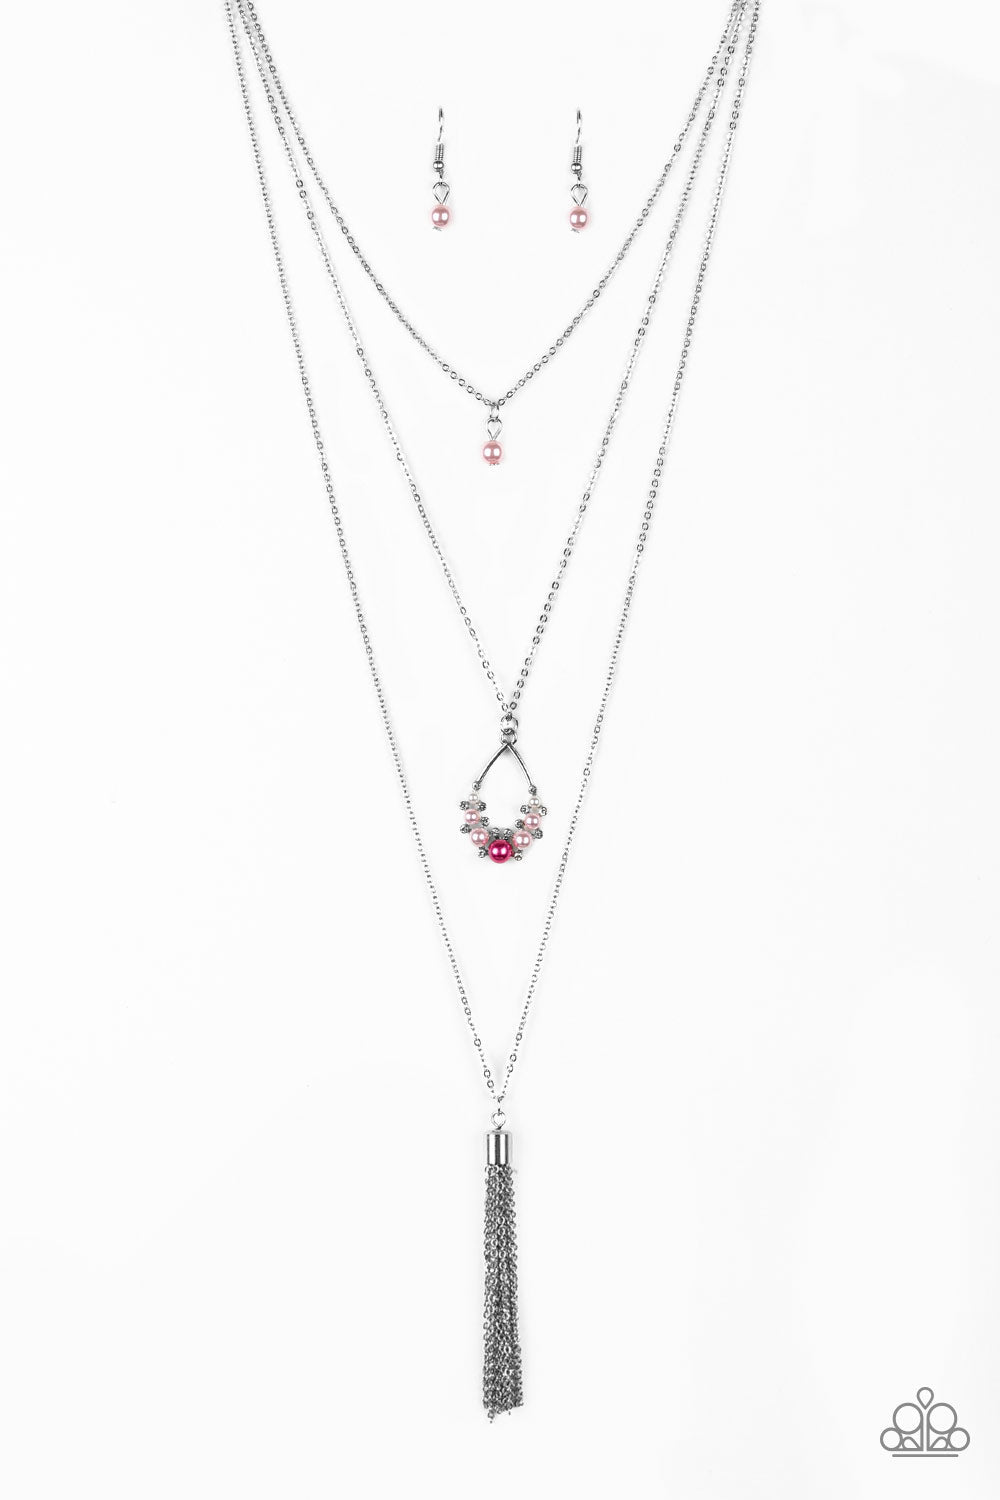 Be Fancy - Pink - Red and Silver Necklace - Paparazzi Accessories - A solitaire pink pearl swings from the uppermost chain, giving way to a teardrop pendant and shimmery silver chain tassel. Dainty white rhinestones and pink pearls collect at the bottom of the centermost pendant for a glamorous finish. Features an adjustable clasp closure. Sold as one individual necklace.